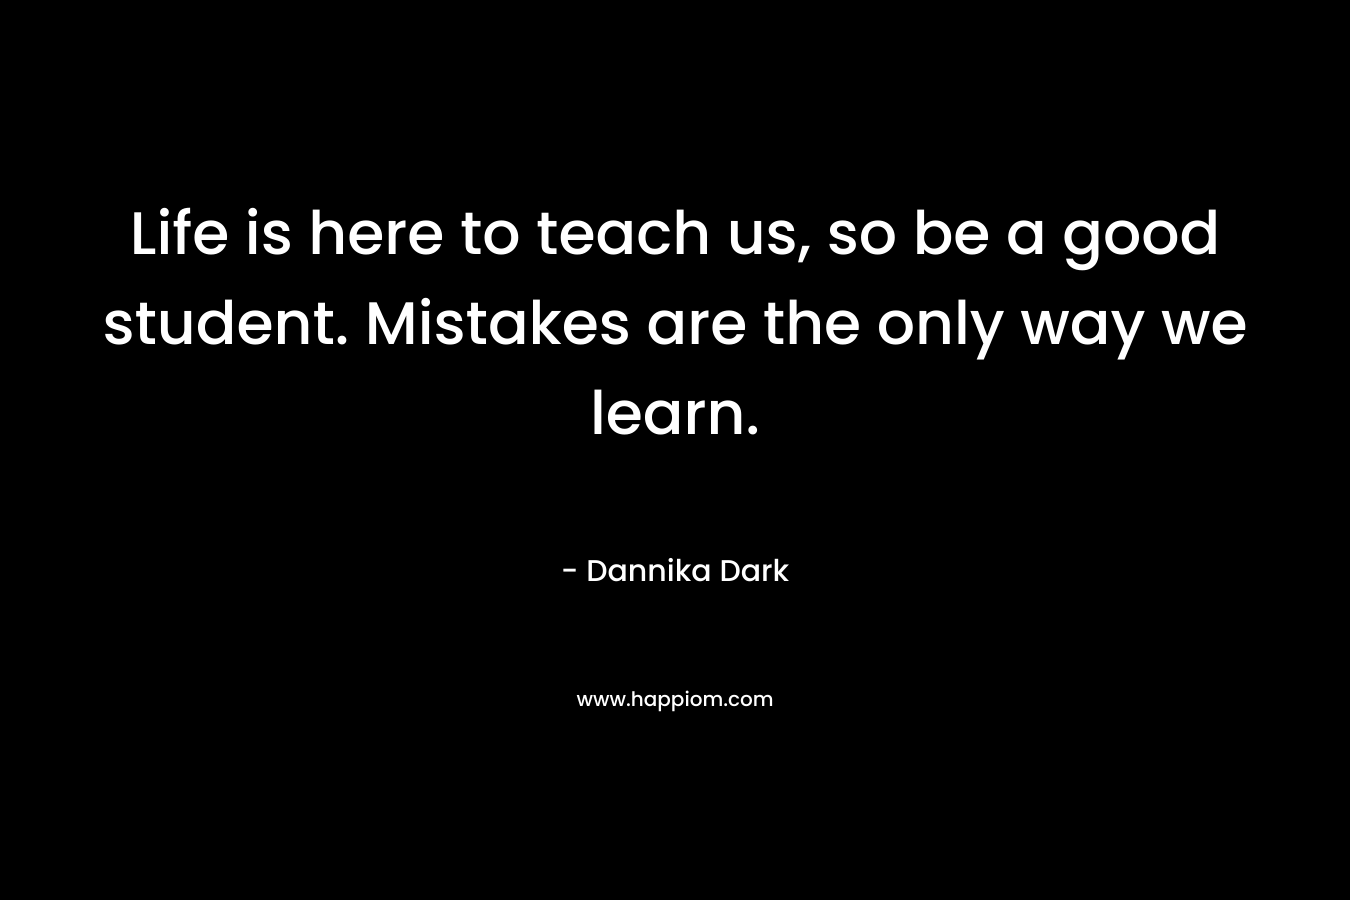 Life is here to teach us, so be a good student. Mistakes are the only way we learn.